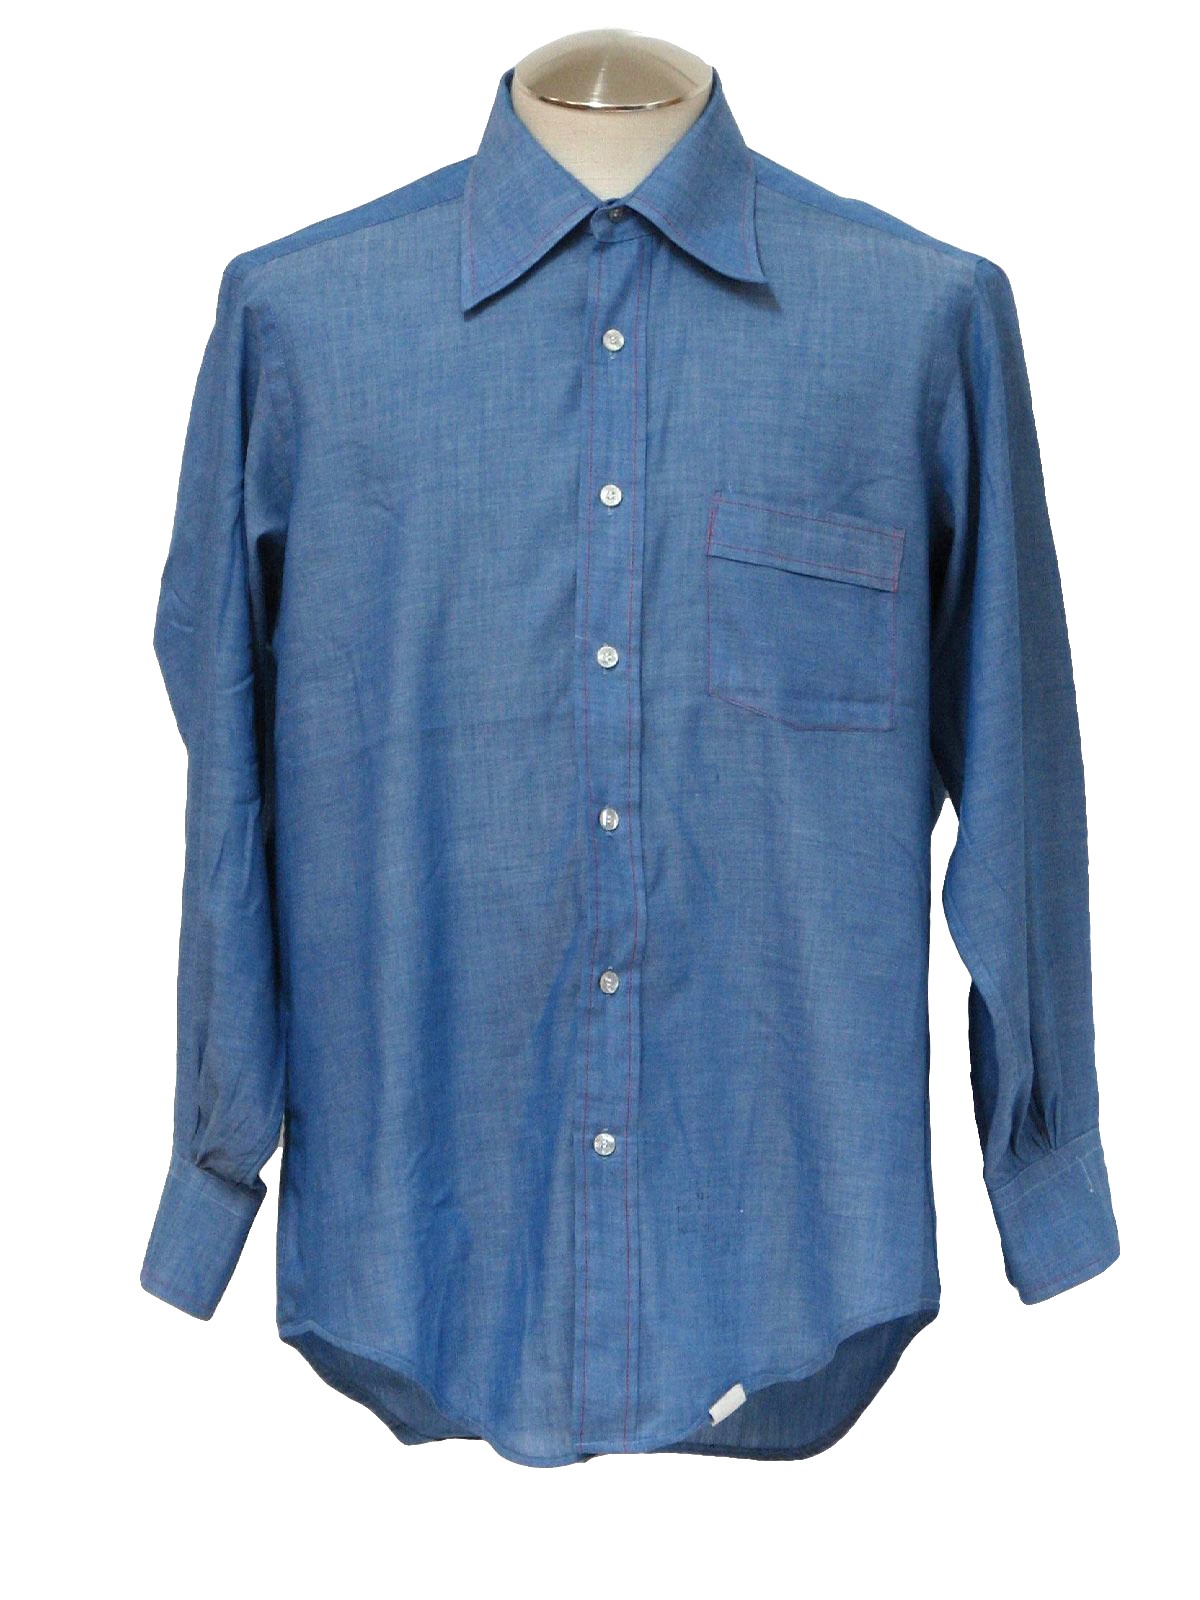 Retro Seventies Shirt: Early 70s -Lathams- Mens blue cotton and ...